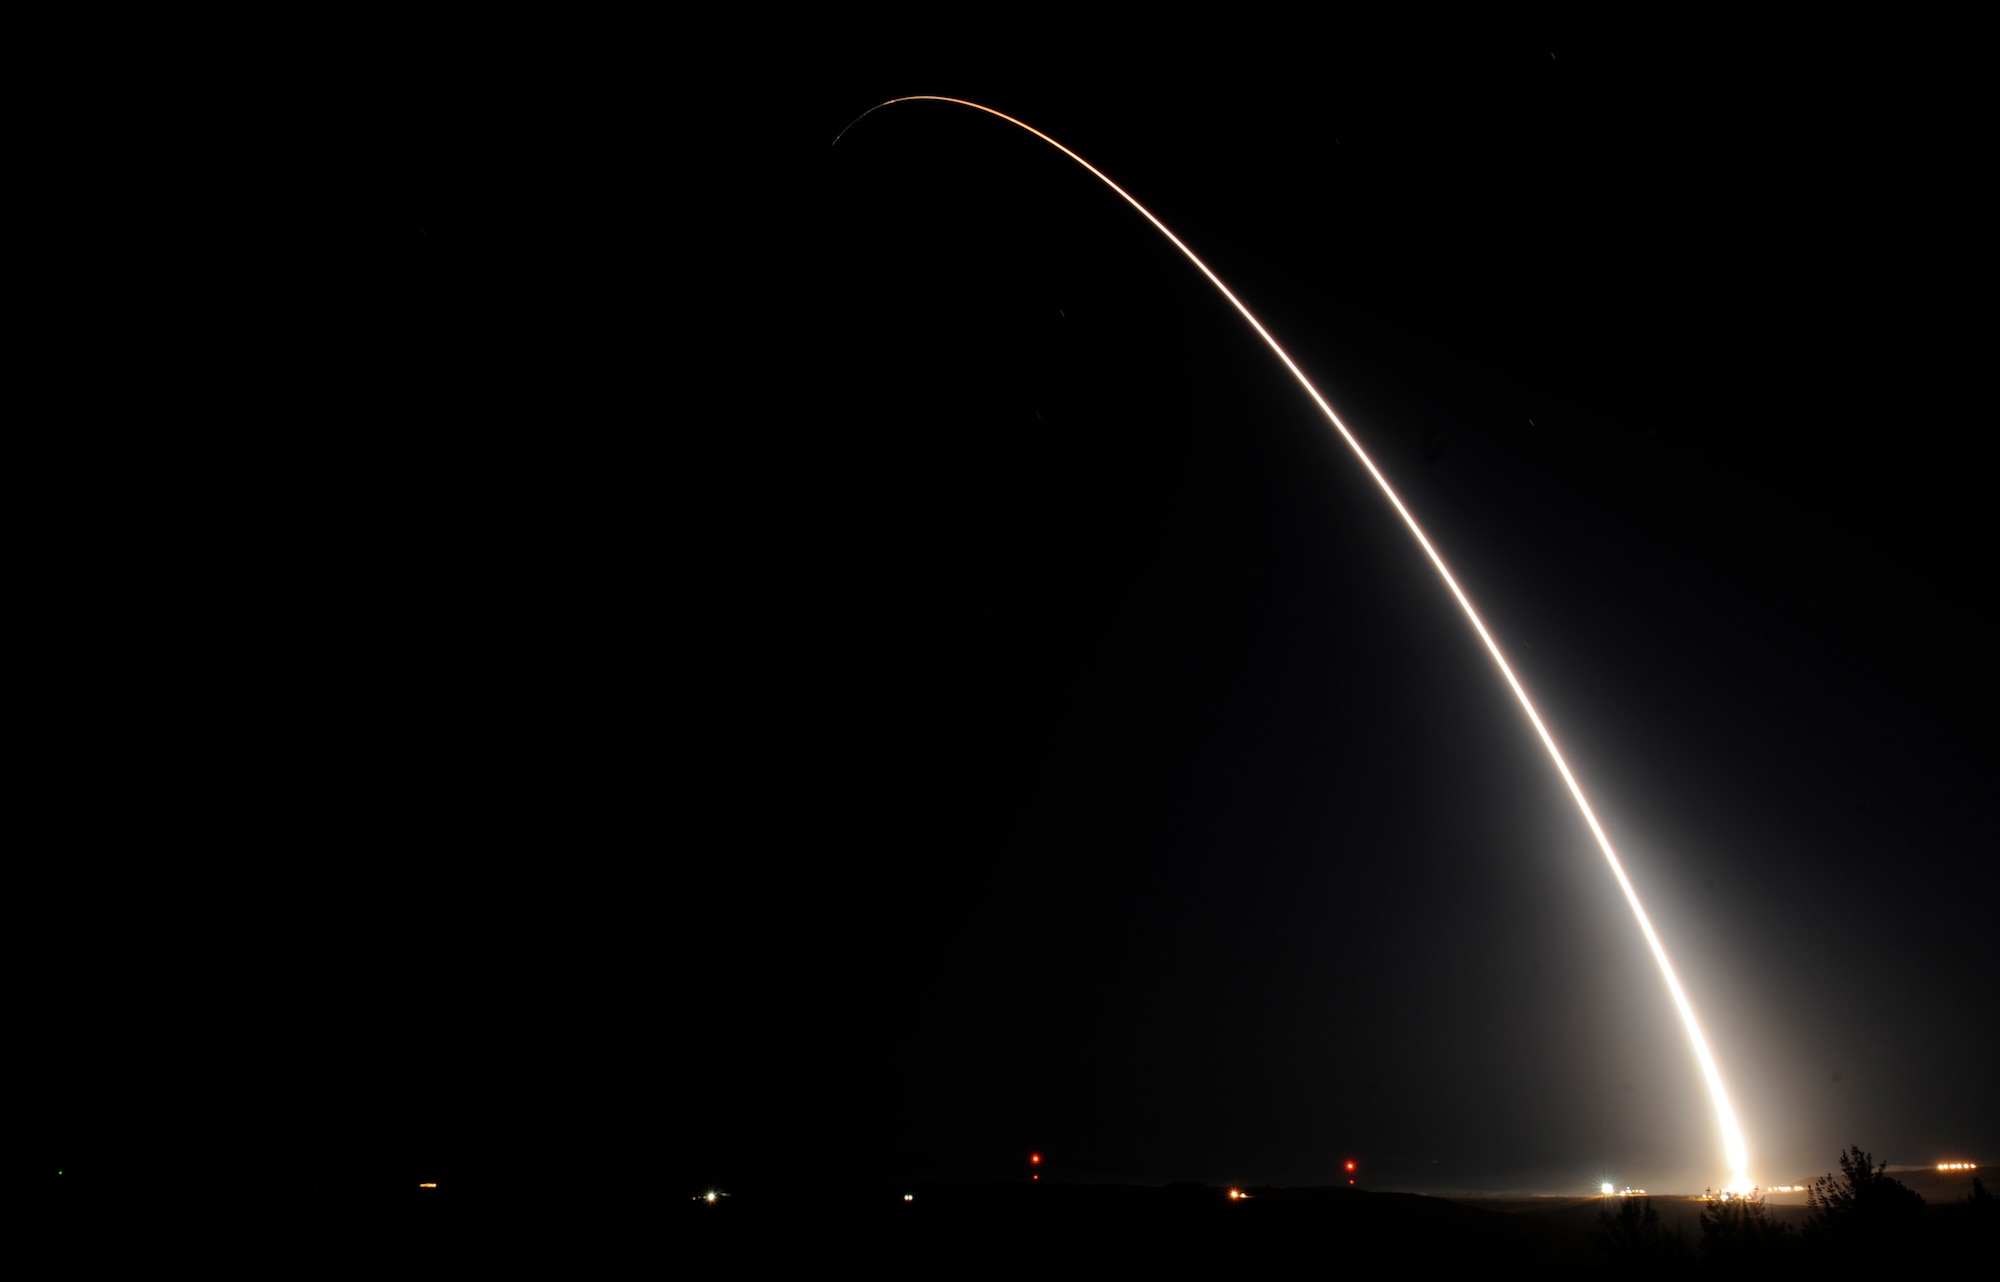 A team of Air Force Global Strike Command Airmen from the 90th Missile Wing at F.E. Warren Air Force Base, Wyo., launched an unarmed Minuteman III intercontinental ballistic missile equipped with a test reentry vehicle from Vandenberg Air Force Base, Calif., Oct. 21, 2015. The ICBM's reentry vehicle, which contained a telemetry package used for operational testing, traveled approximately 4,200 miles to the Kwajalein Atoll in the Marshall Islands. Test launches verify the accuracy and reliability of the ICBM weapon system, providing valuable data to ensure a continued safe, secure and effective nuclear deterrent. (U.S. Air Force photo by Airman 1st Class Ian Dudley)
